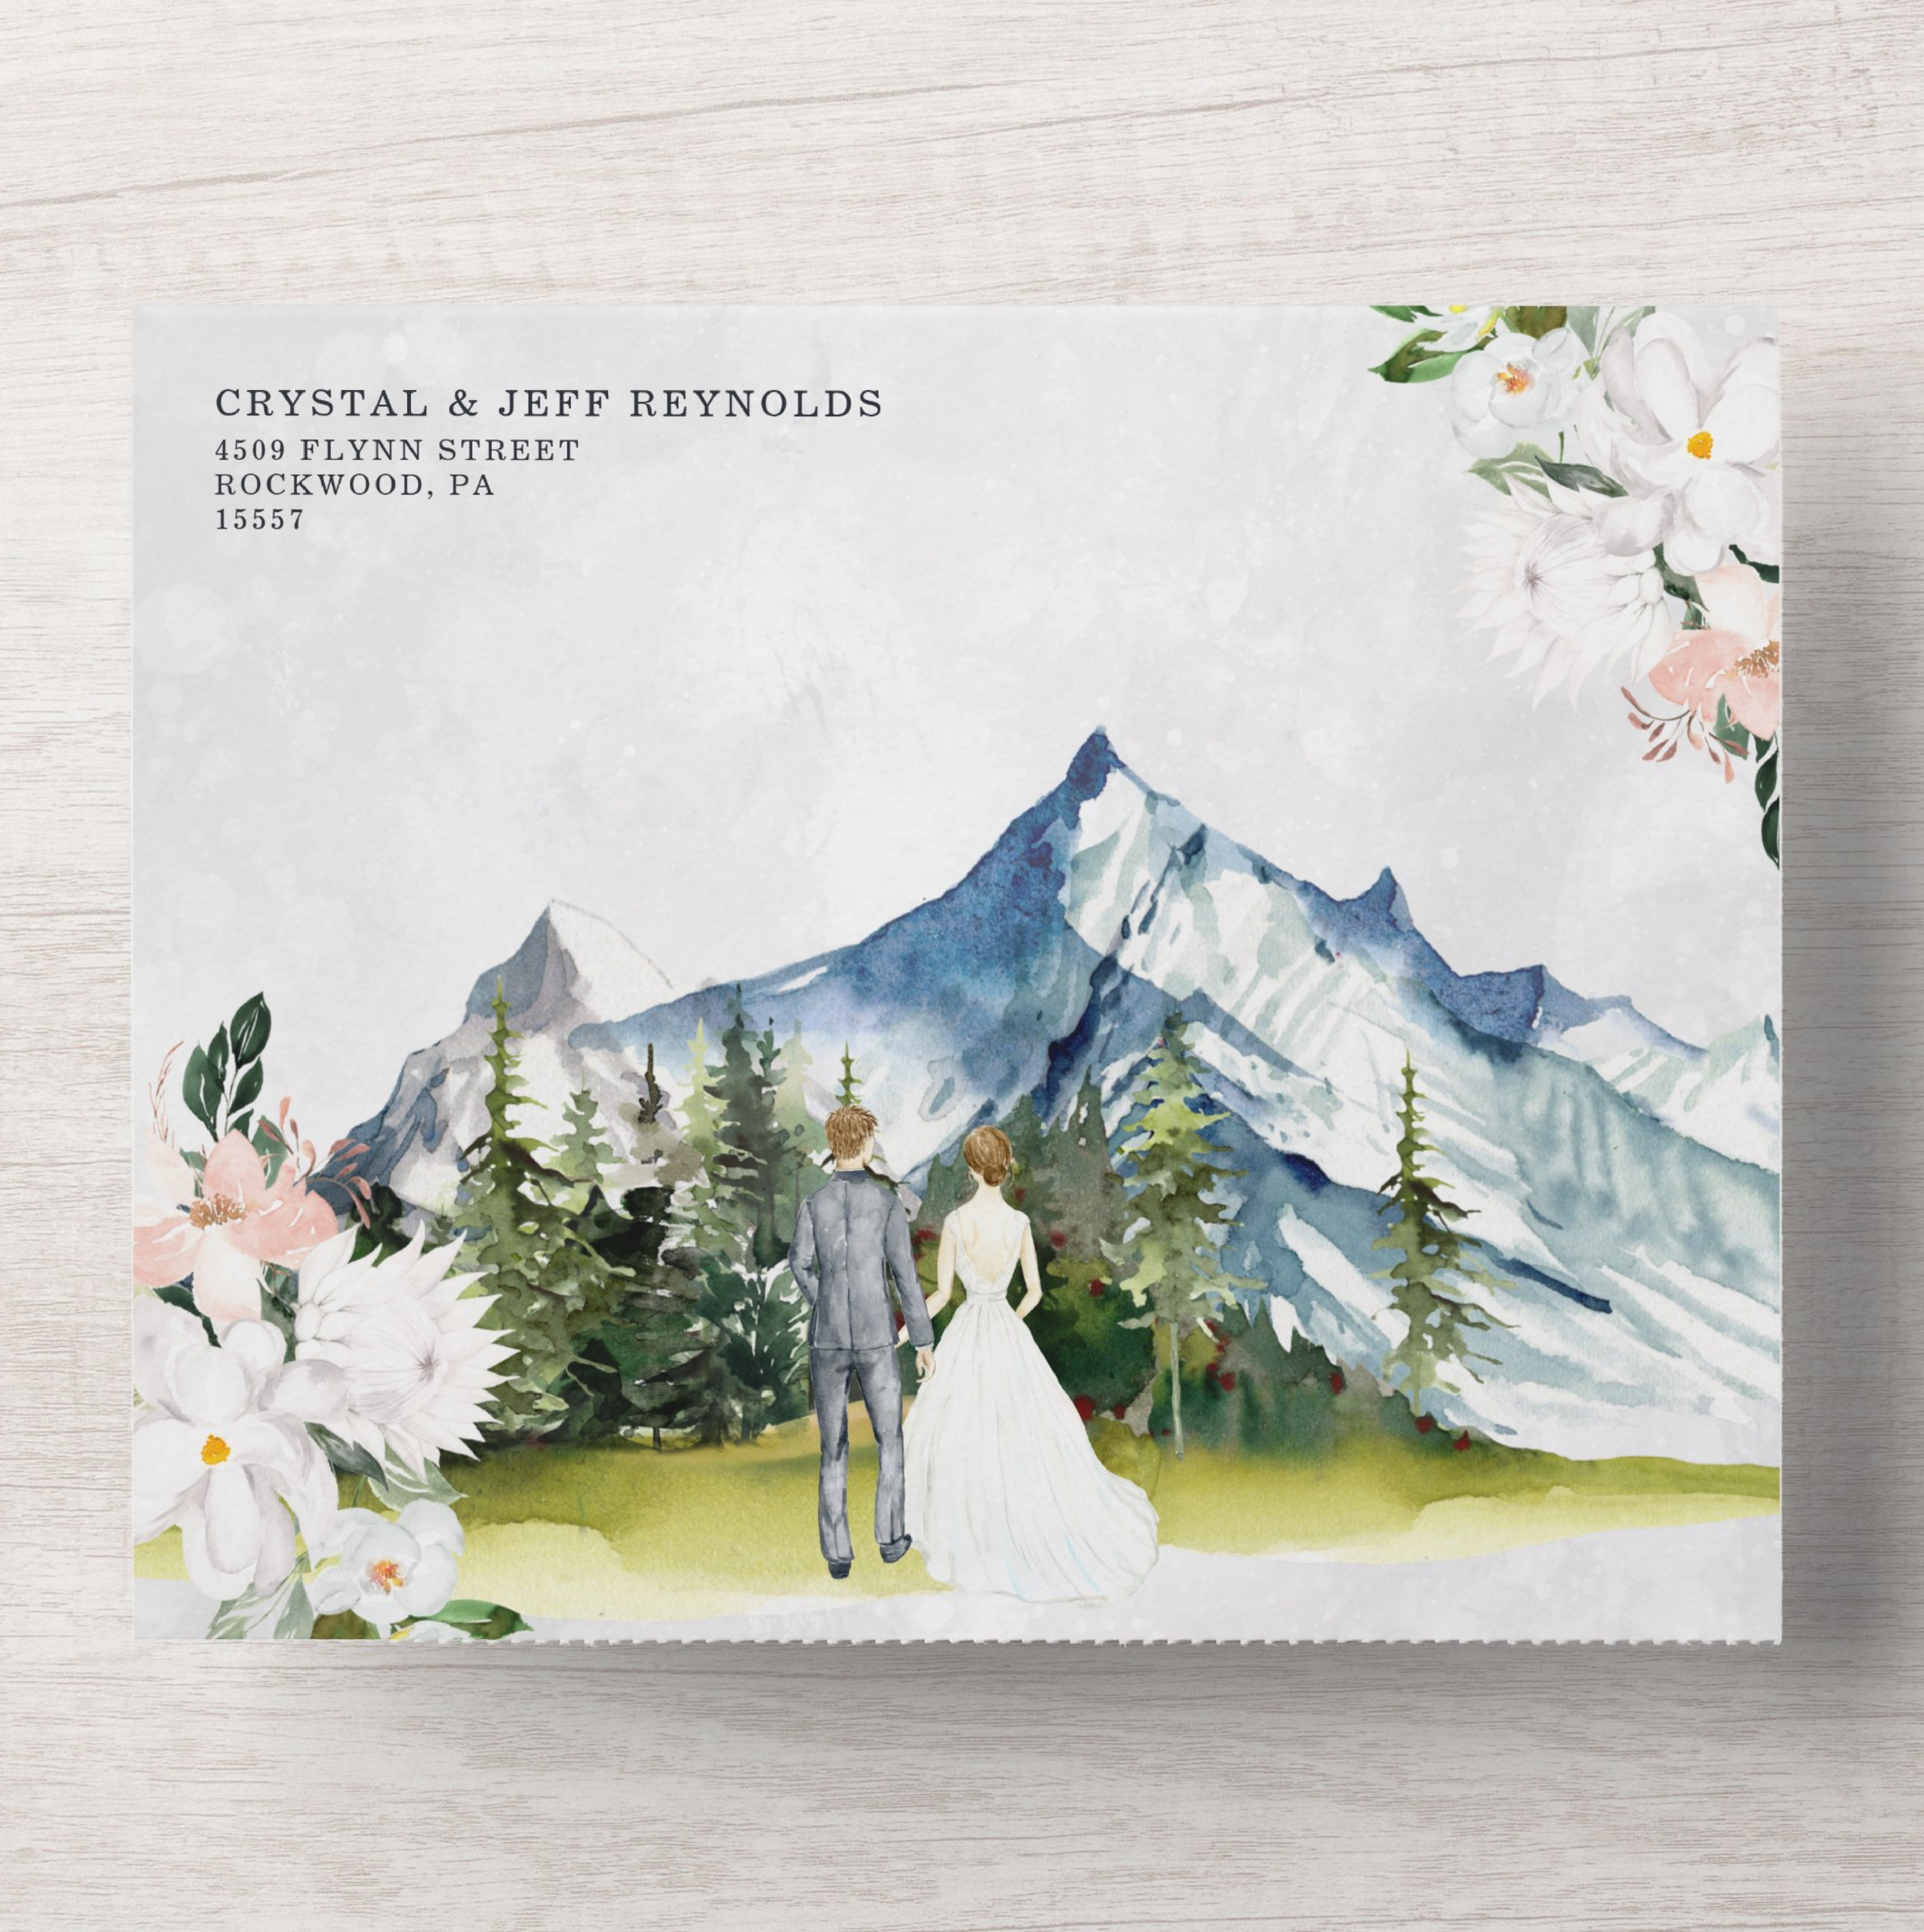 rustic_mountain_wedding_all_in_one_wedding_invite-rb4f89177379641d1b424883f05c9d84b_uunwh_1024.png